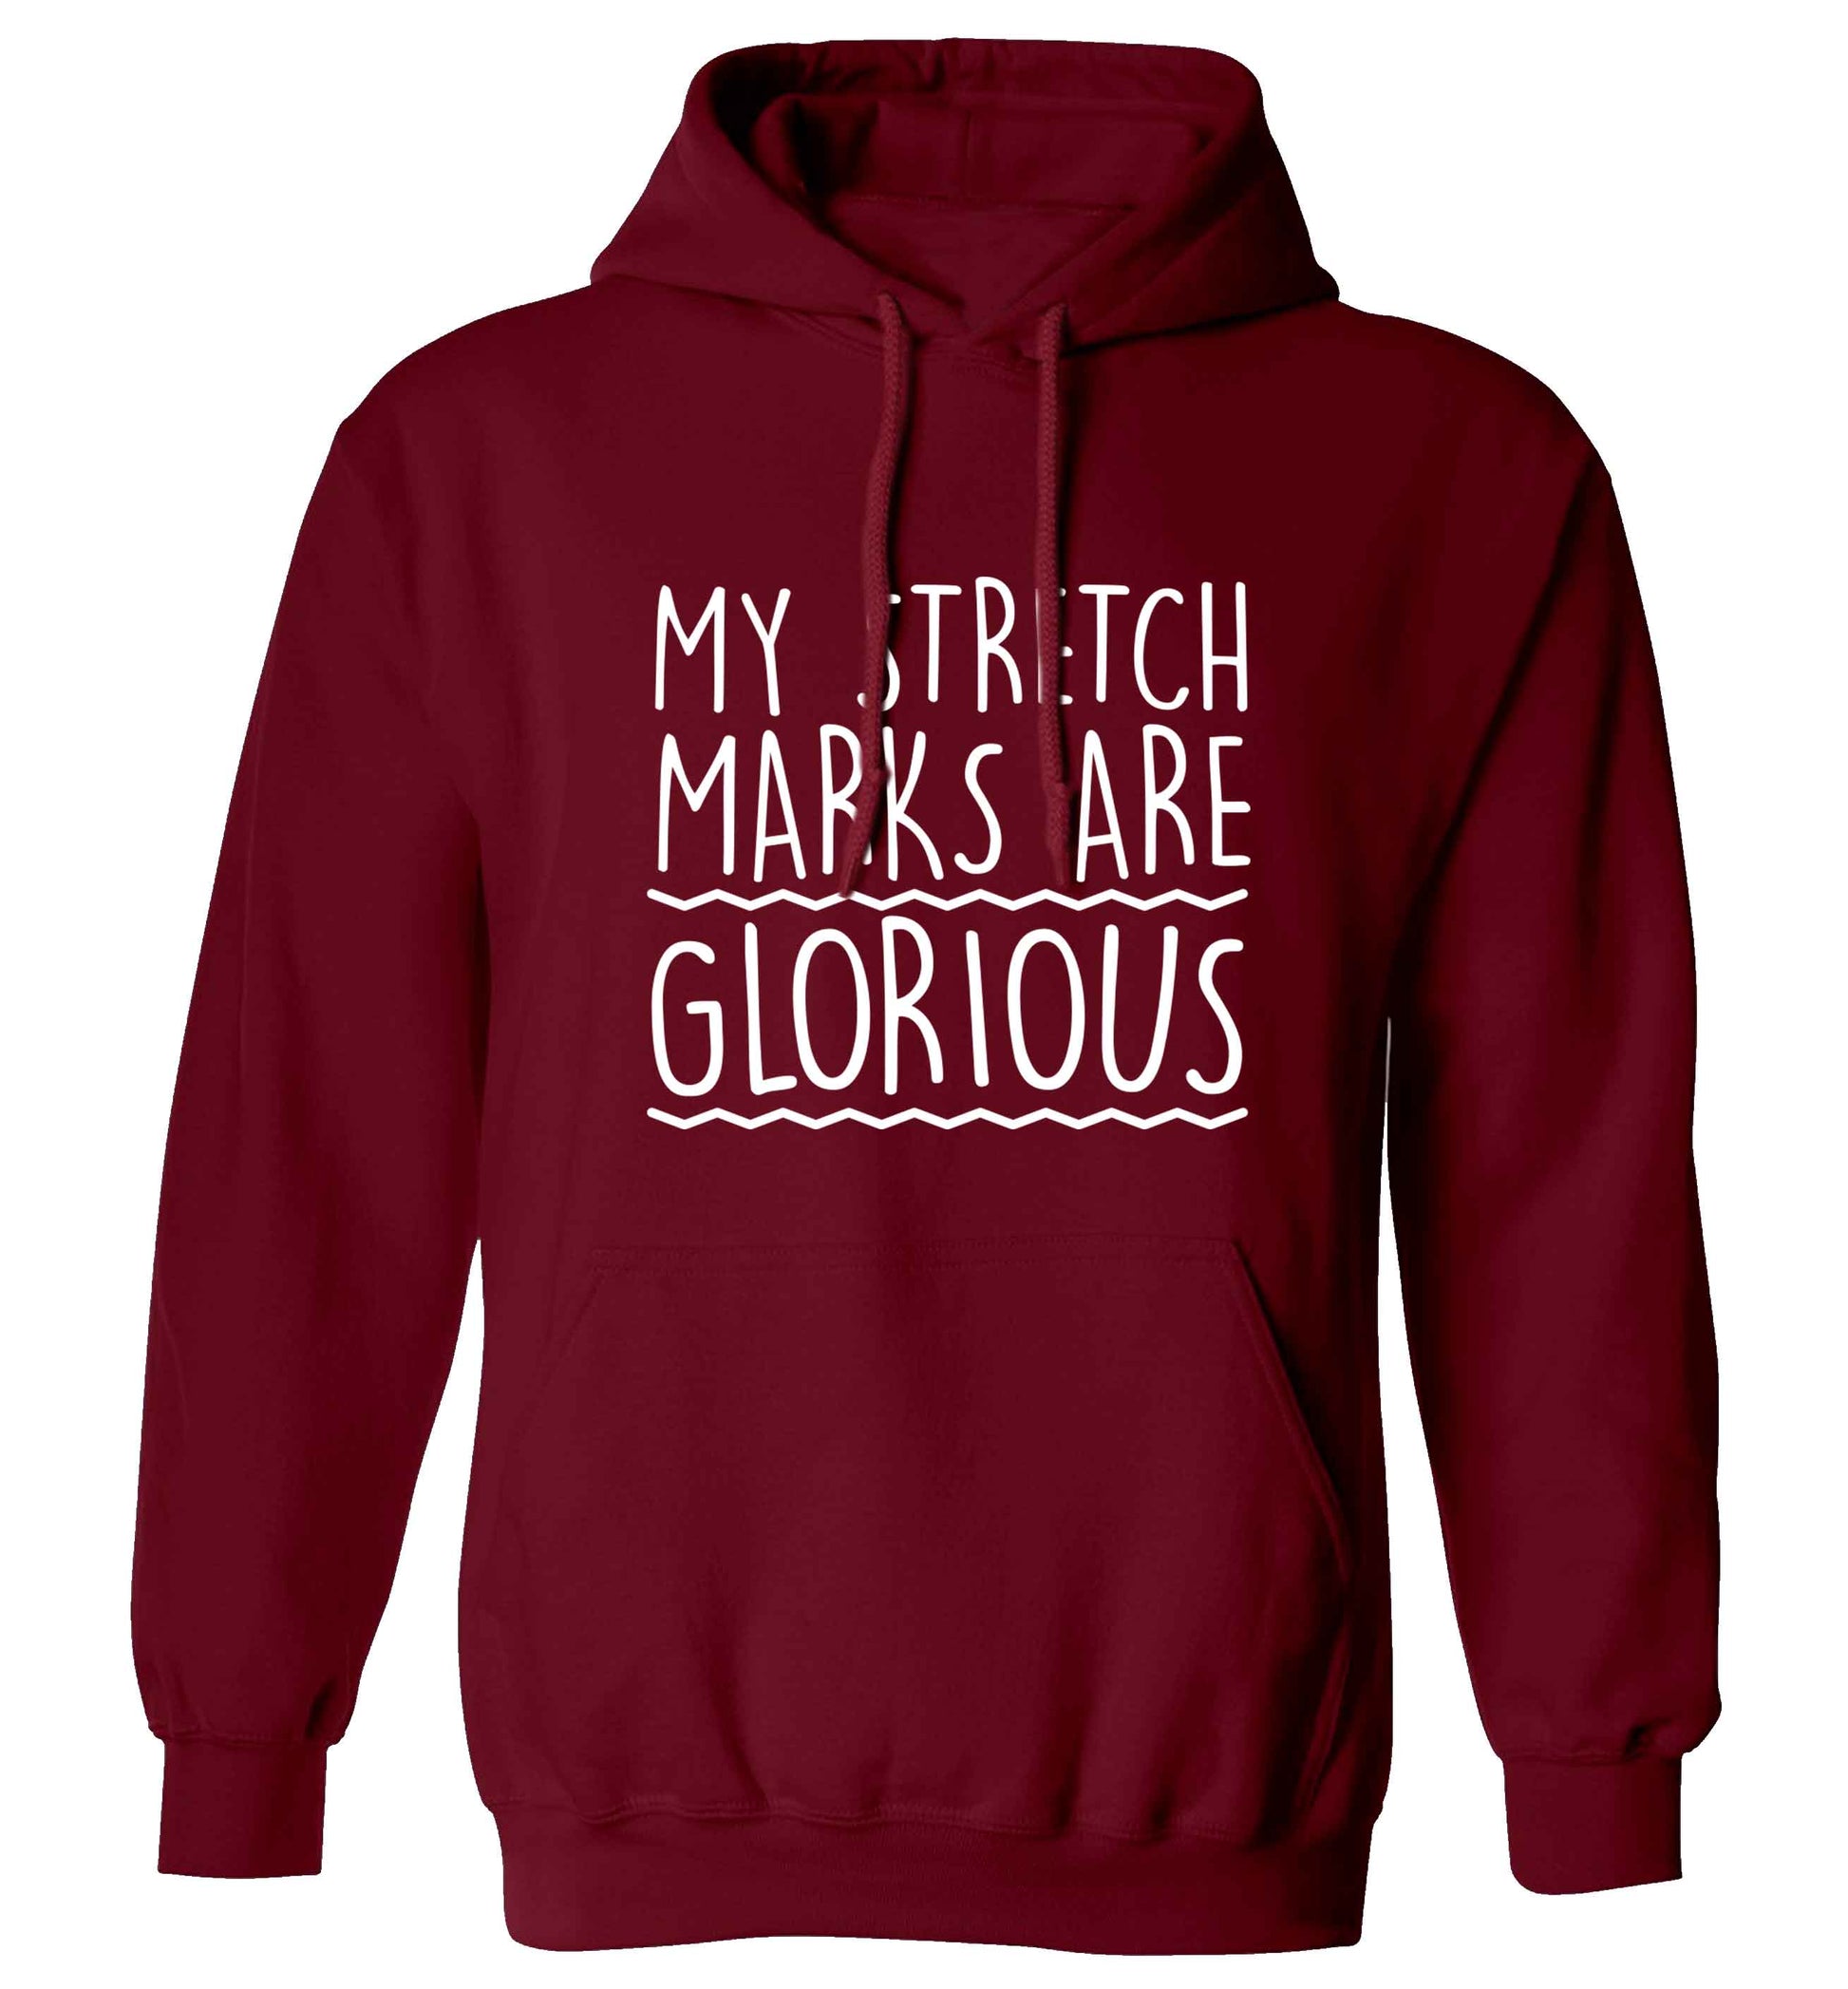 My stretch marks are glorious adults unisex maroon hoodie 2XL